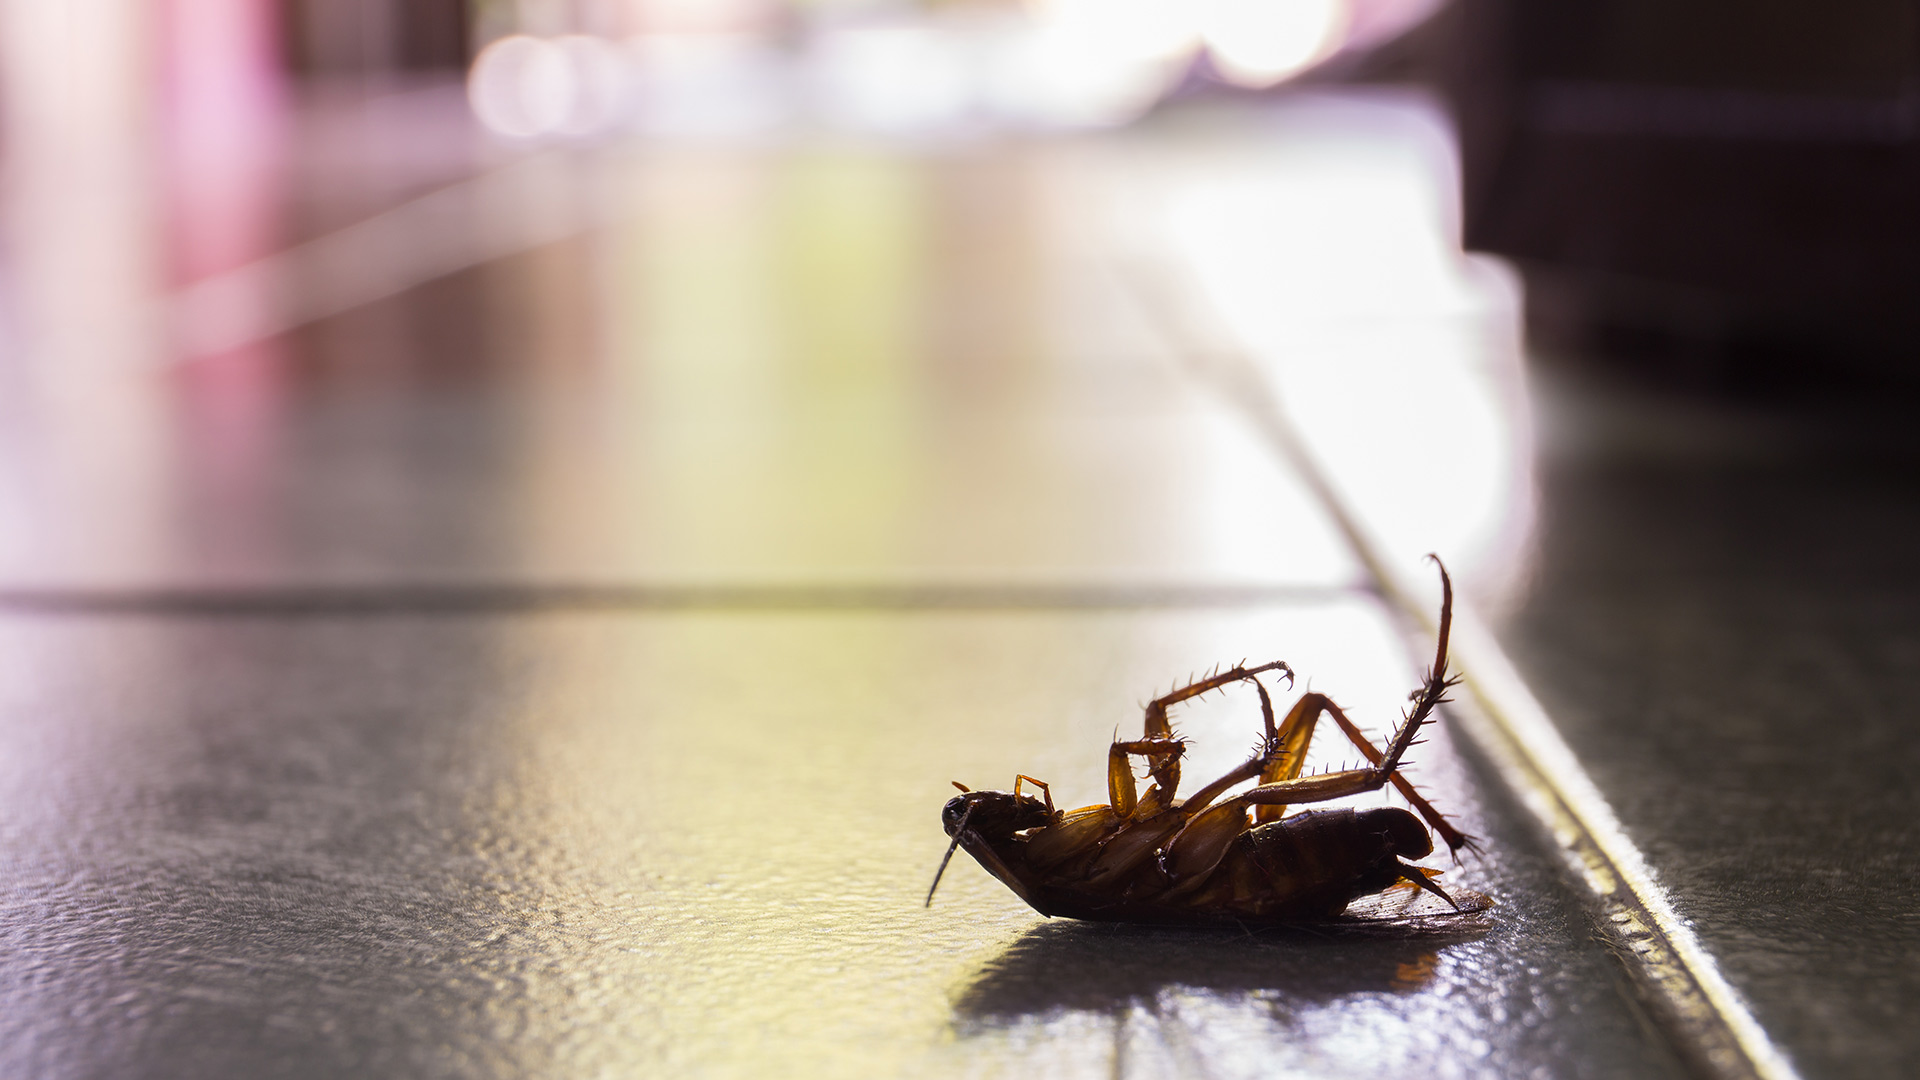 4 Things You Can Do to Help Keep Roaches Out of Your Home or Business